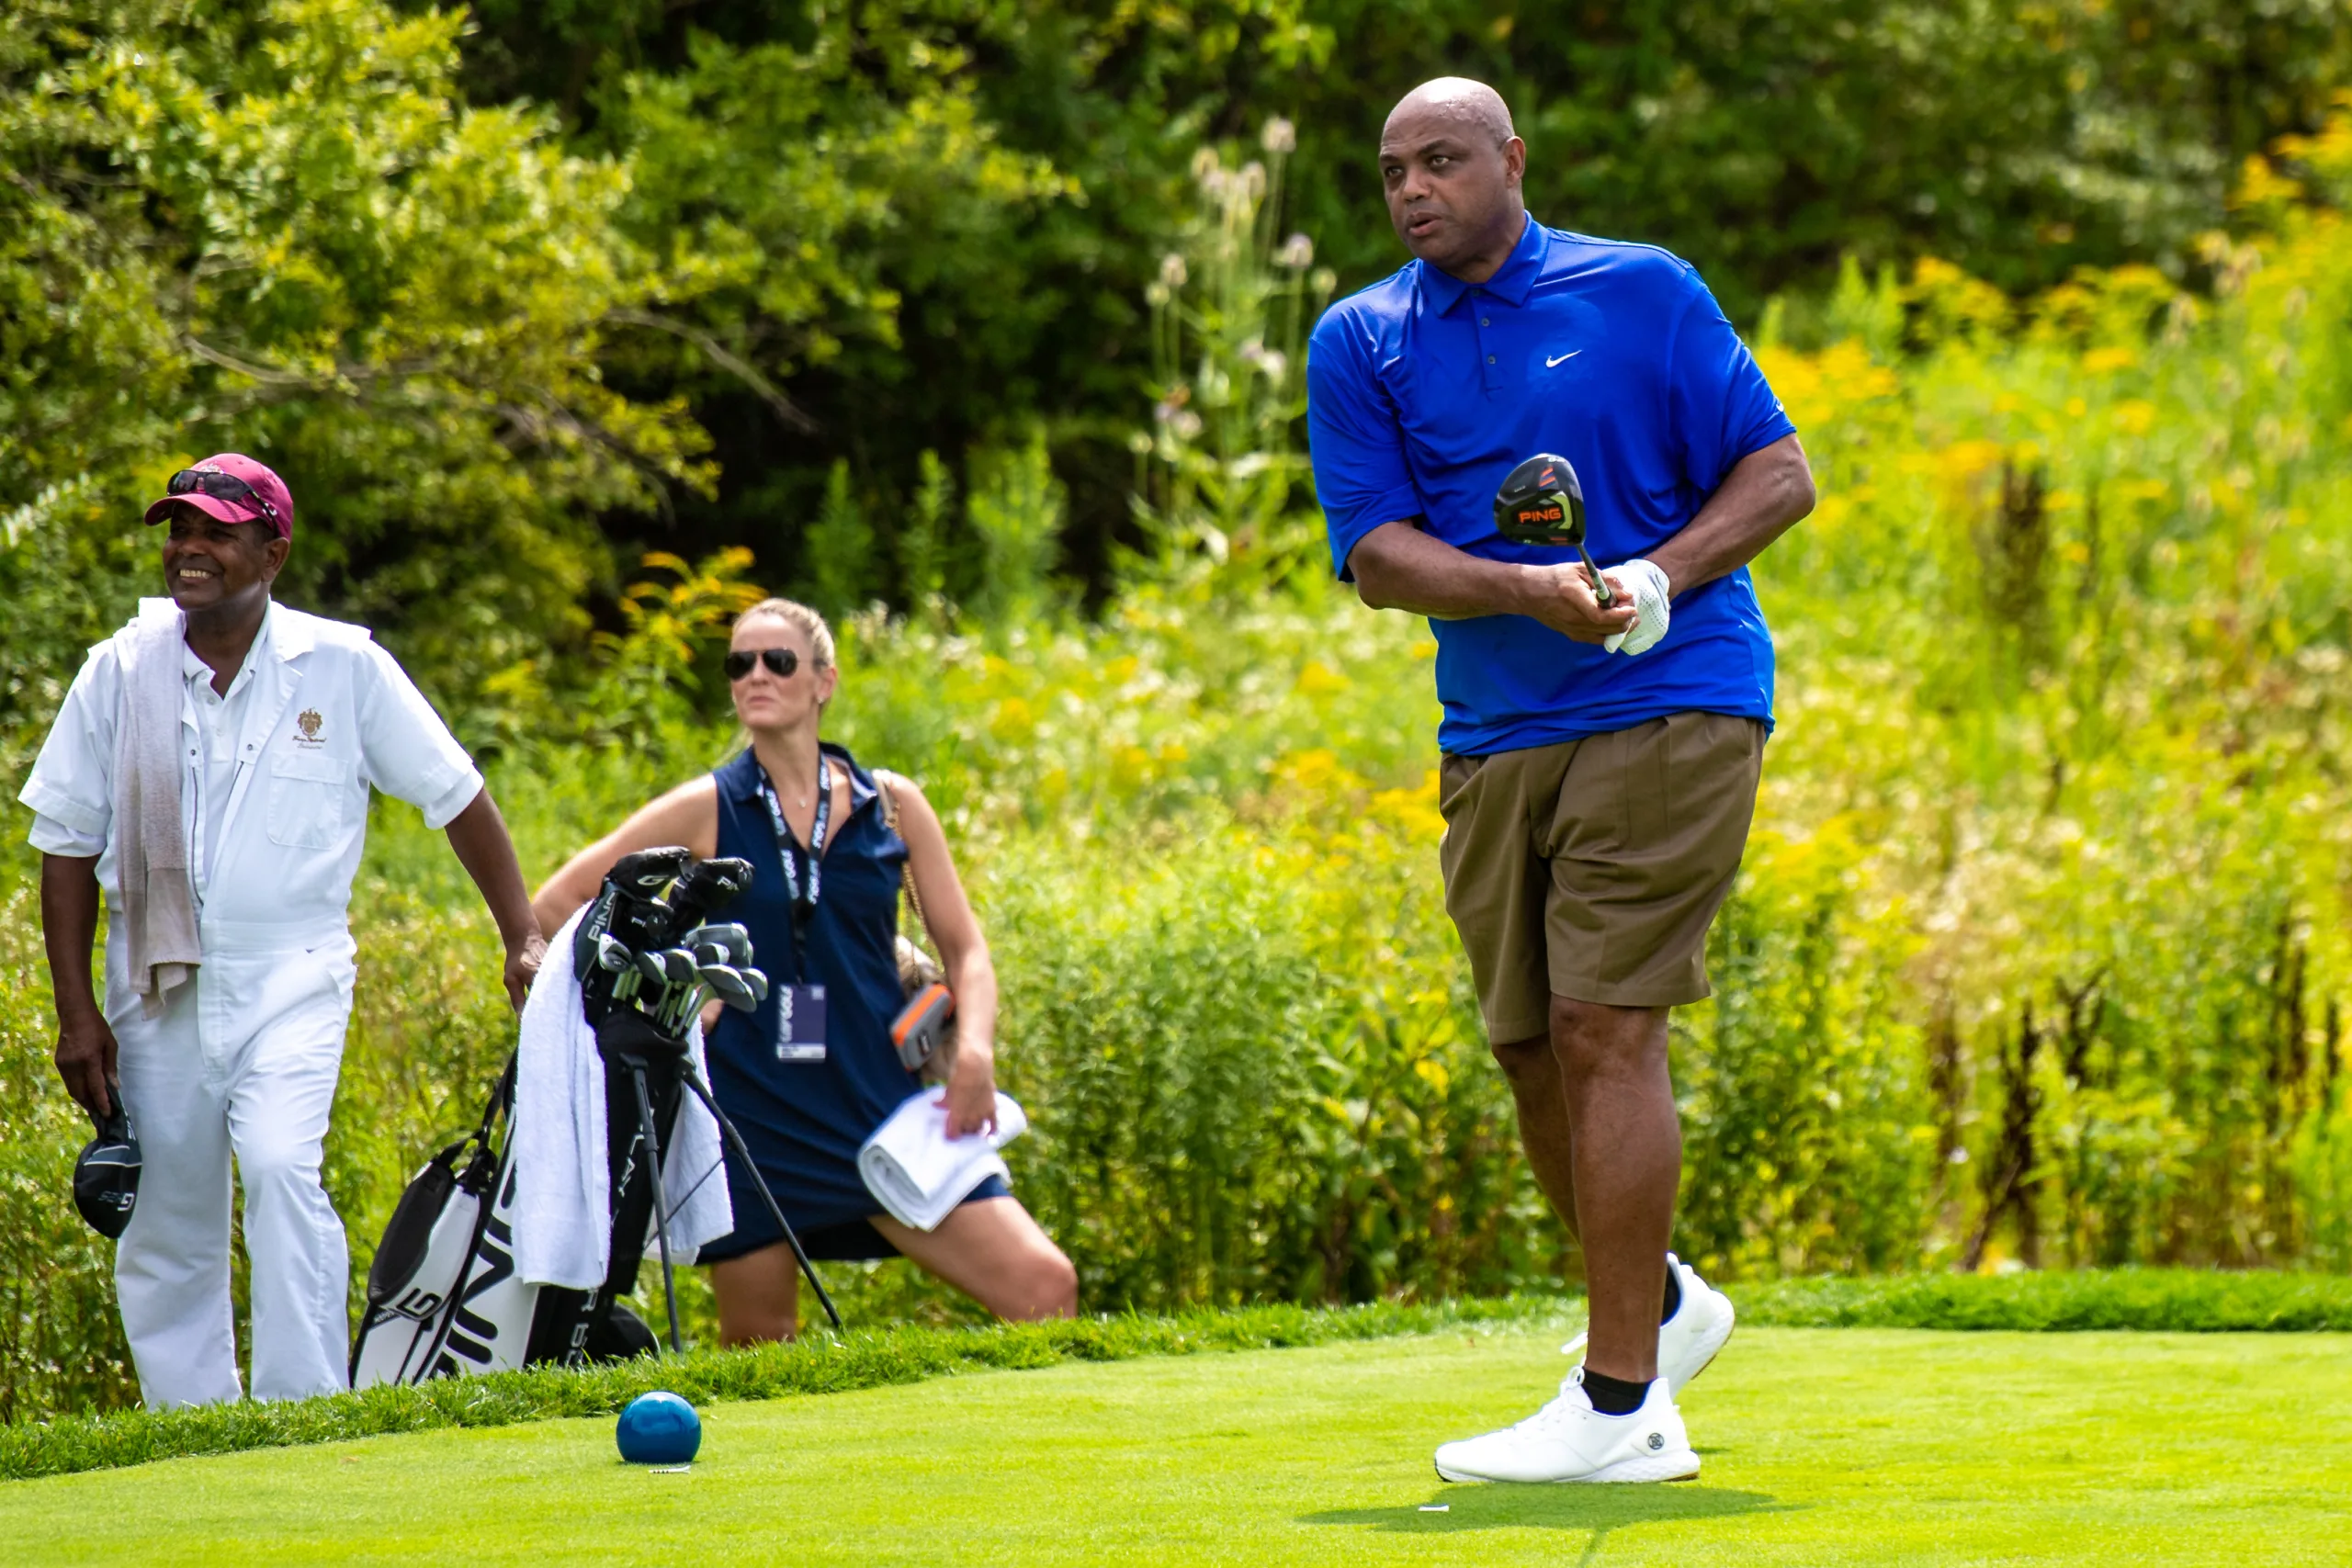 Charles Barkley leaving NBA TV, could golf be in his future?